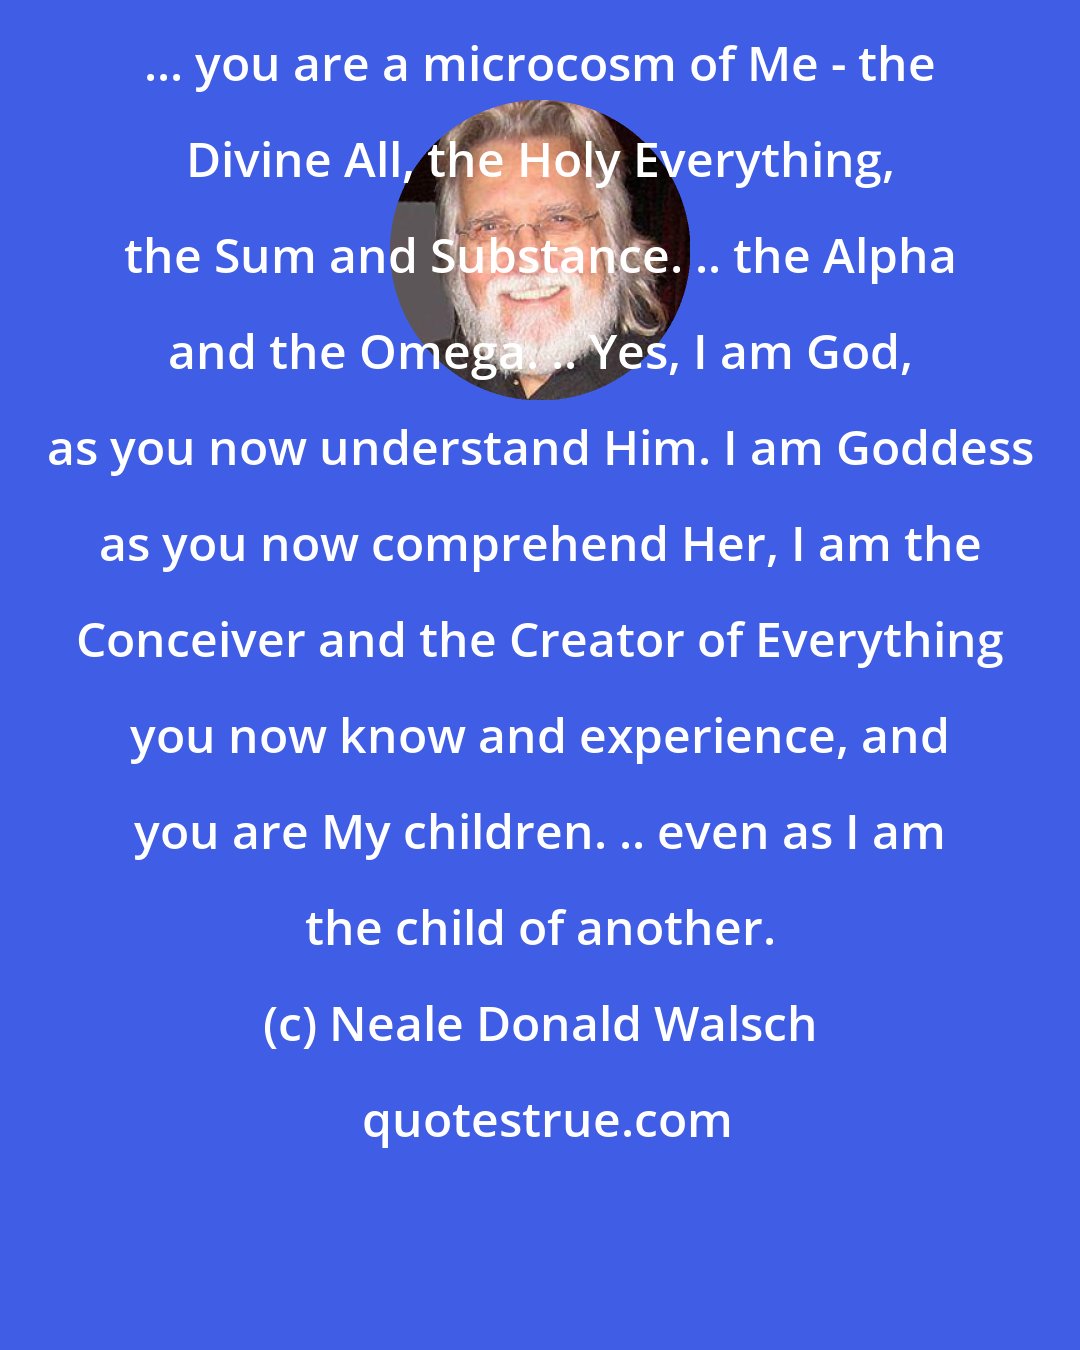 Neale Donald Walsch: ... you are a microcosm of Me - the Divine All, the Holy Everything, the Sum and Substance. .. the Alpha and the Omega. .. Yes, I am God, as you now understand Him. I am Goddess as you now comprehend Her, I am the Conceiver and the Creator of Everything you now know and experience, and you are My children. .. even as I am the child of another.